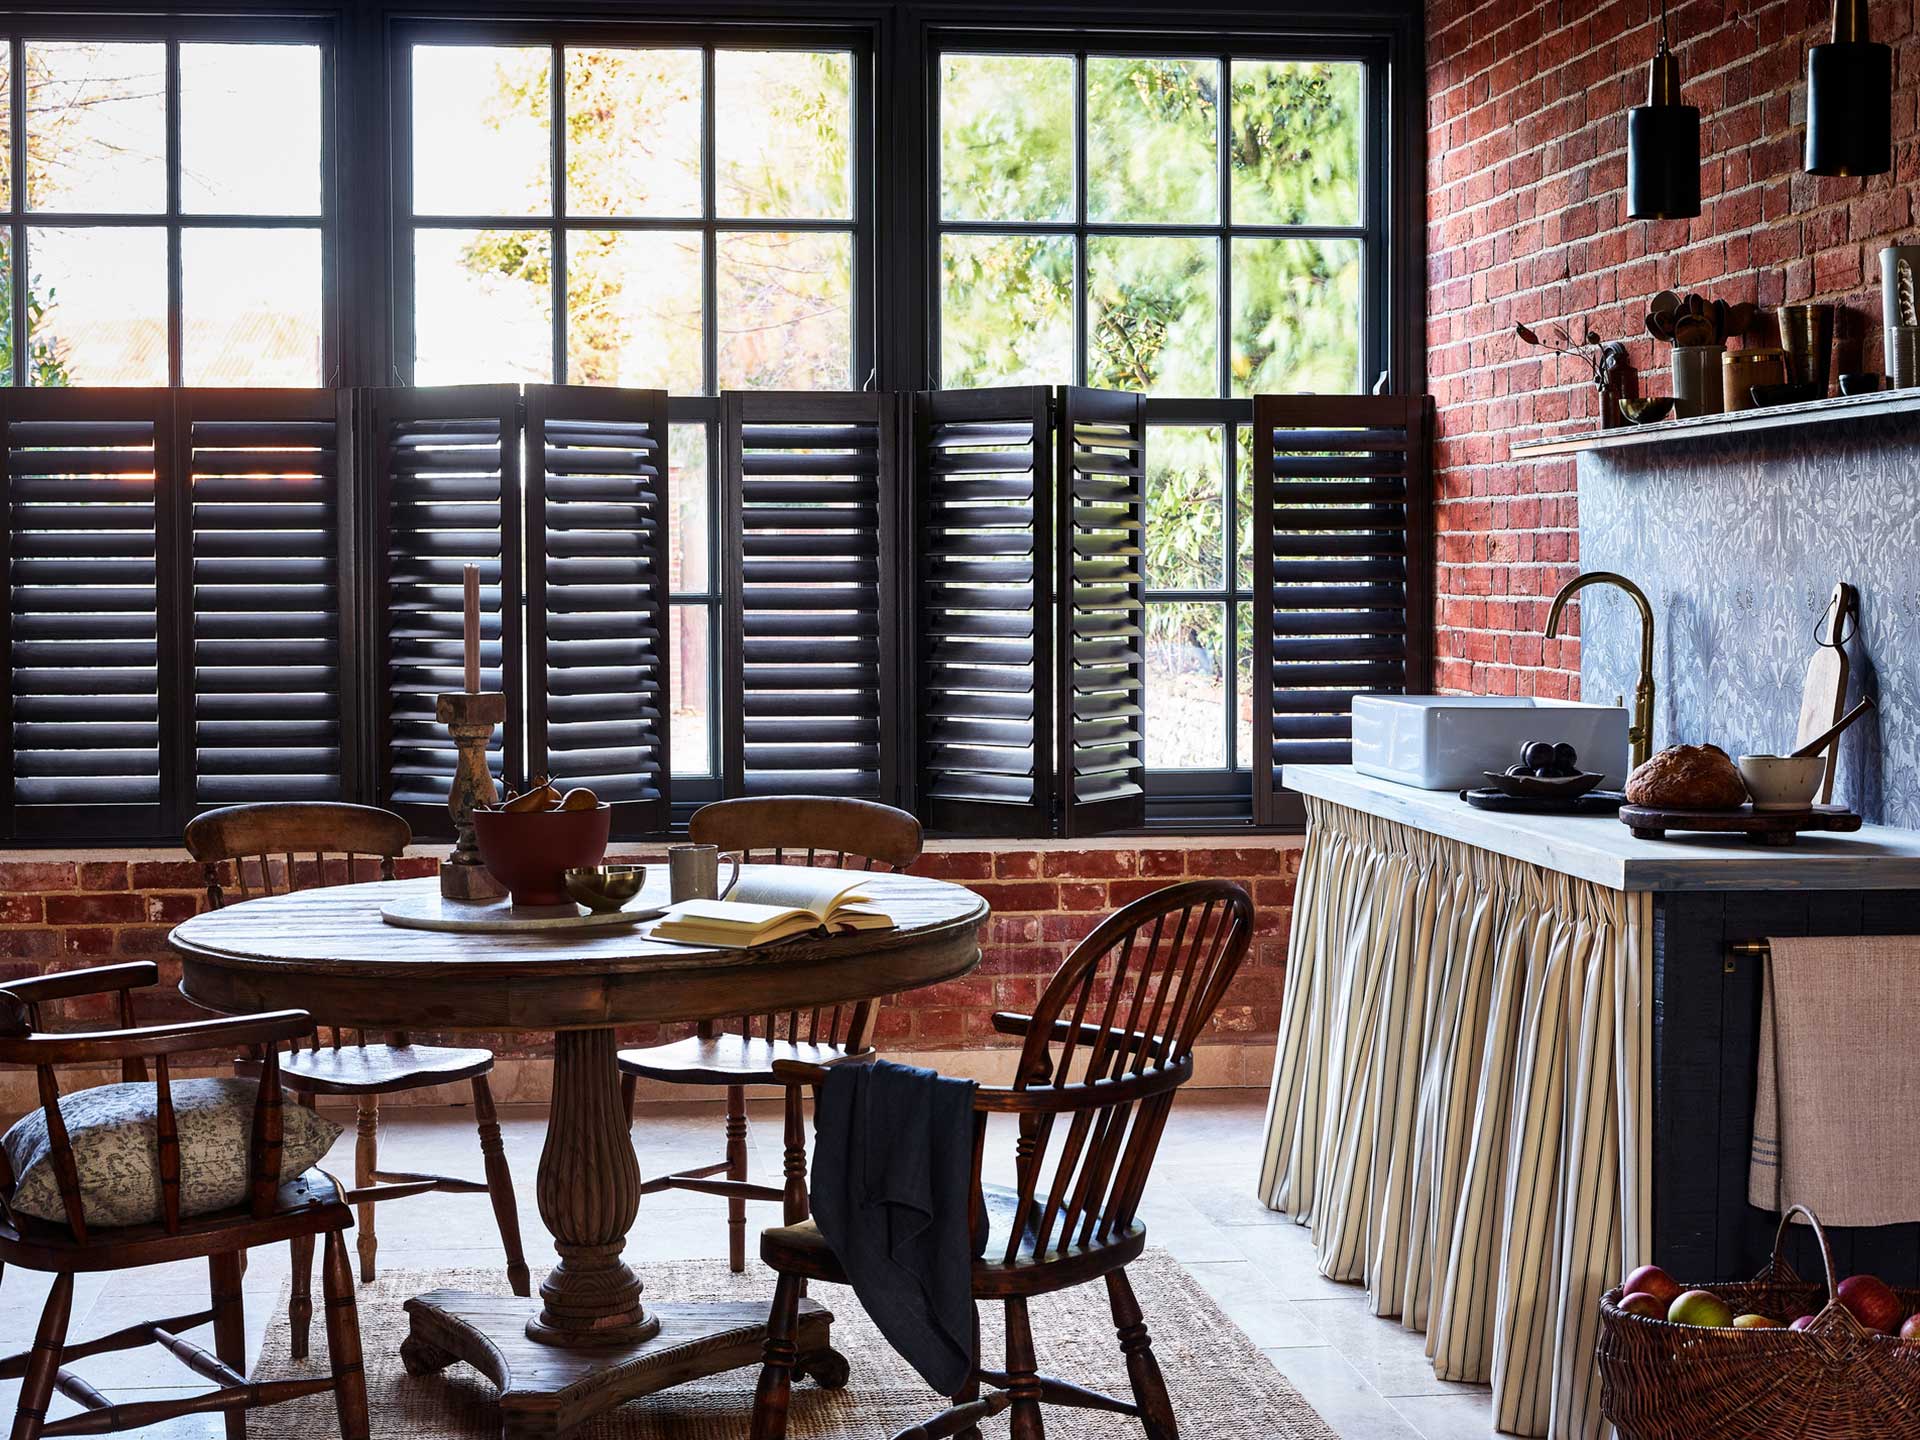 A cafe style shutter is a chic option for your sash windows